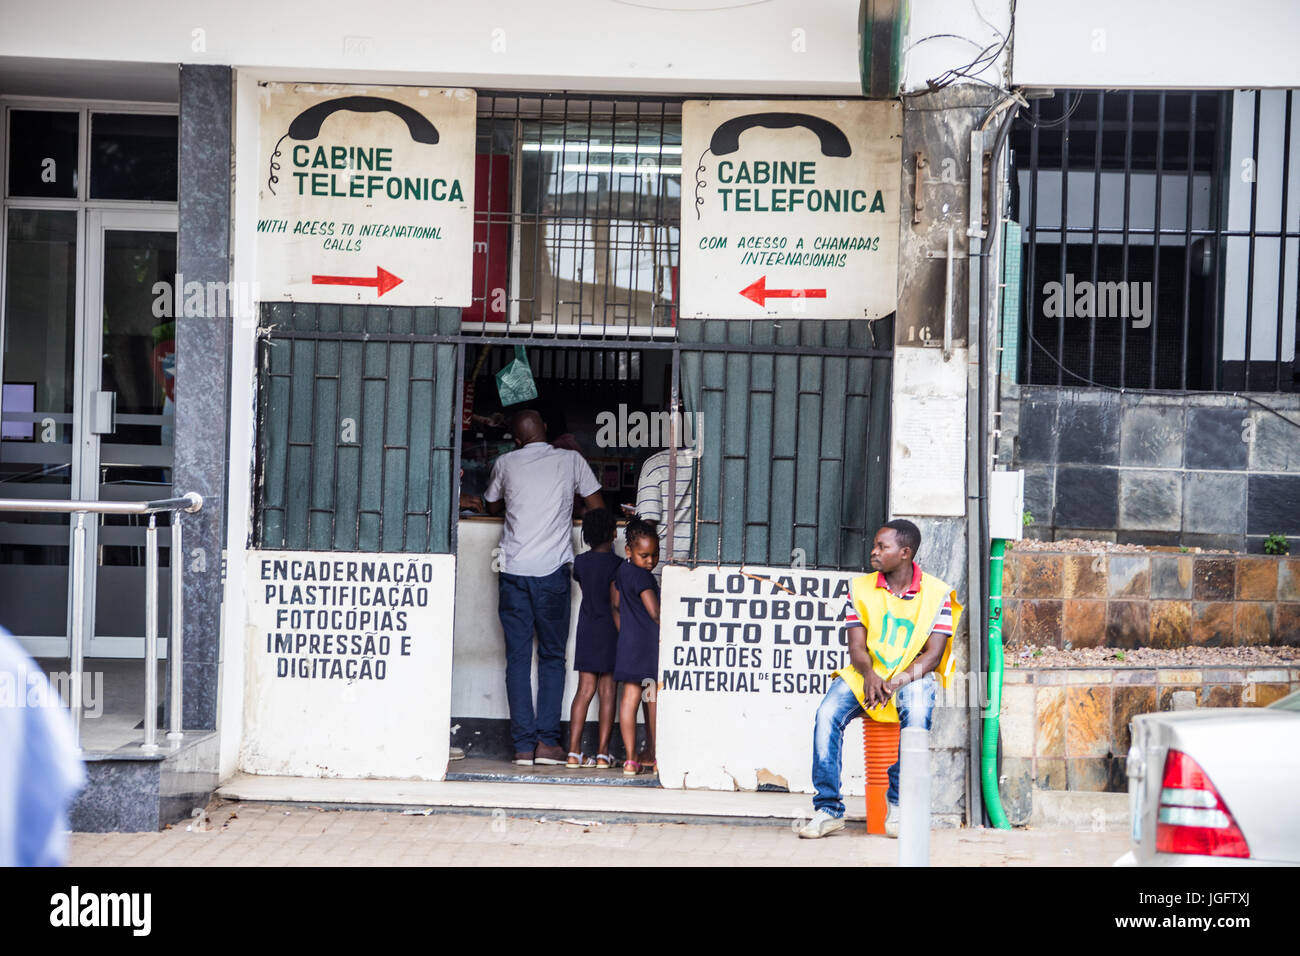 Cabine Telephonica, pay telephone company in Maputo, Mozambique Stock Photo